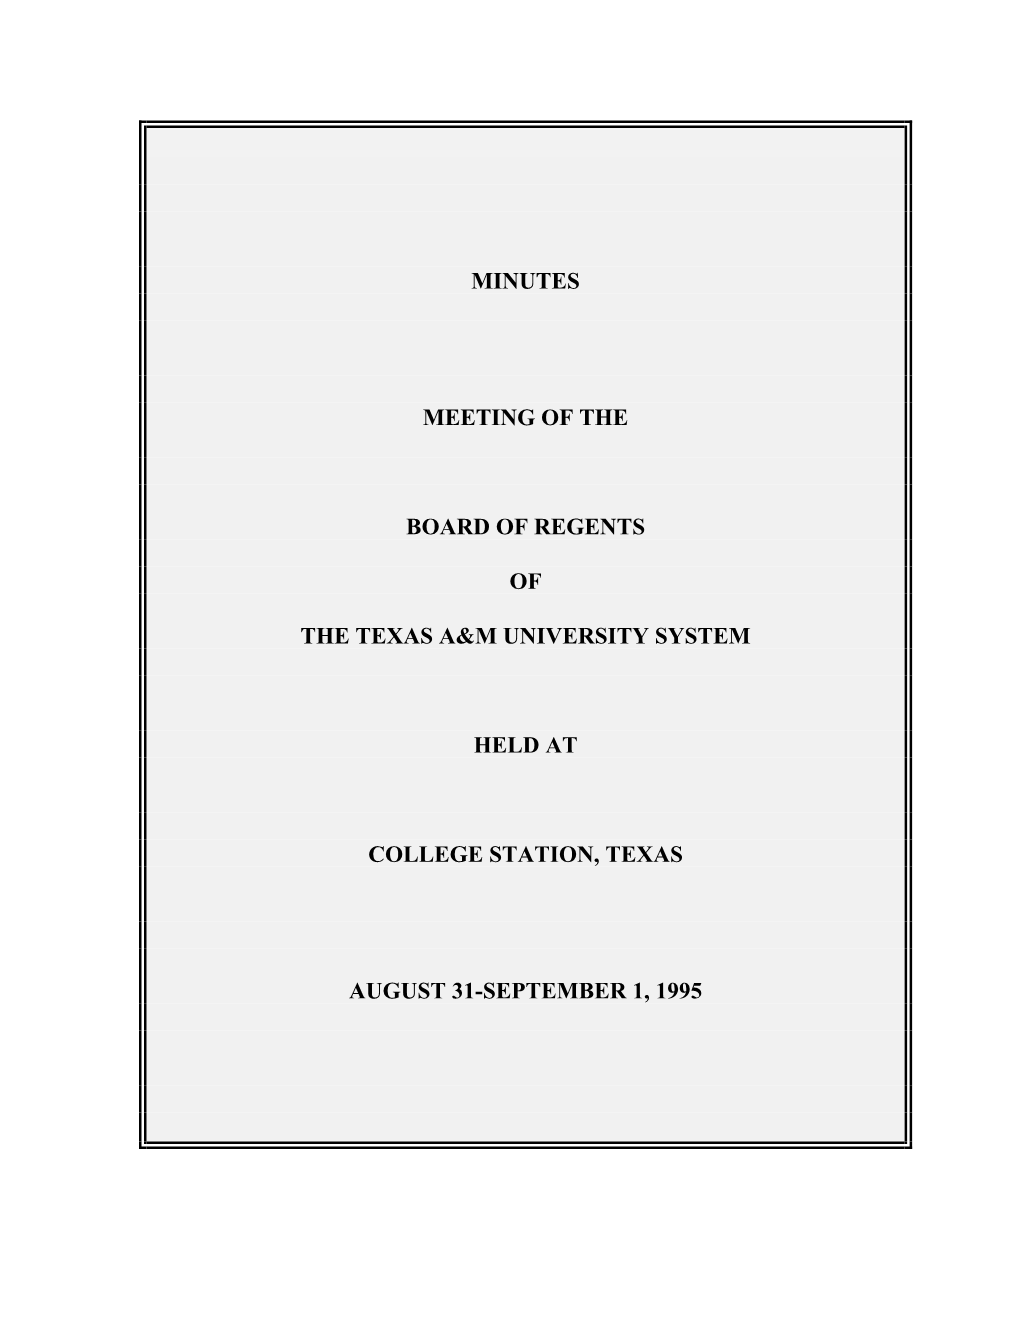 Minutes Meeting of the Board of Regents of the Texas A&M University